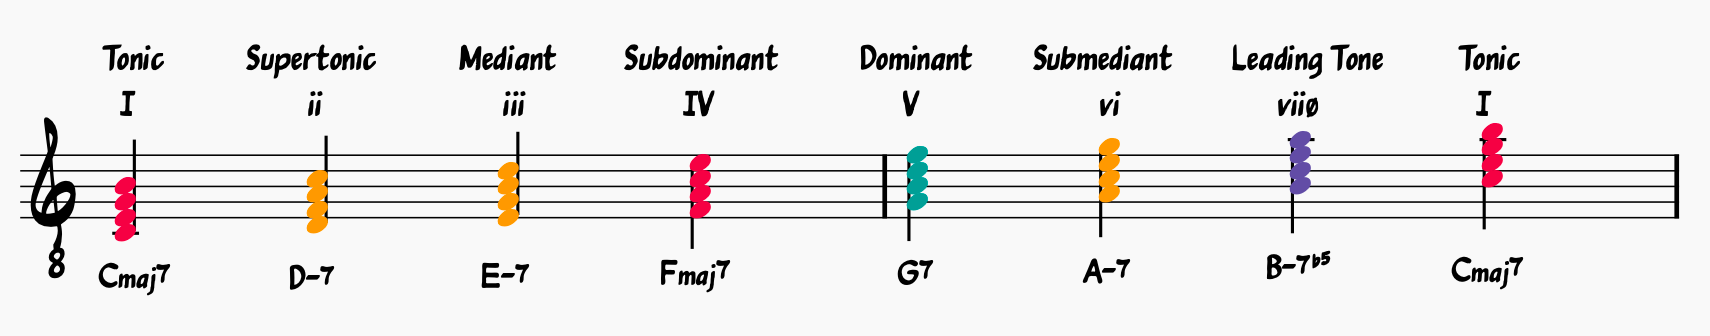 Major Scale Harmonized in seventh chords with the chord qualities color-coded